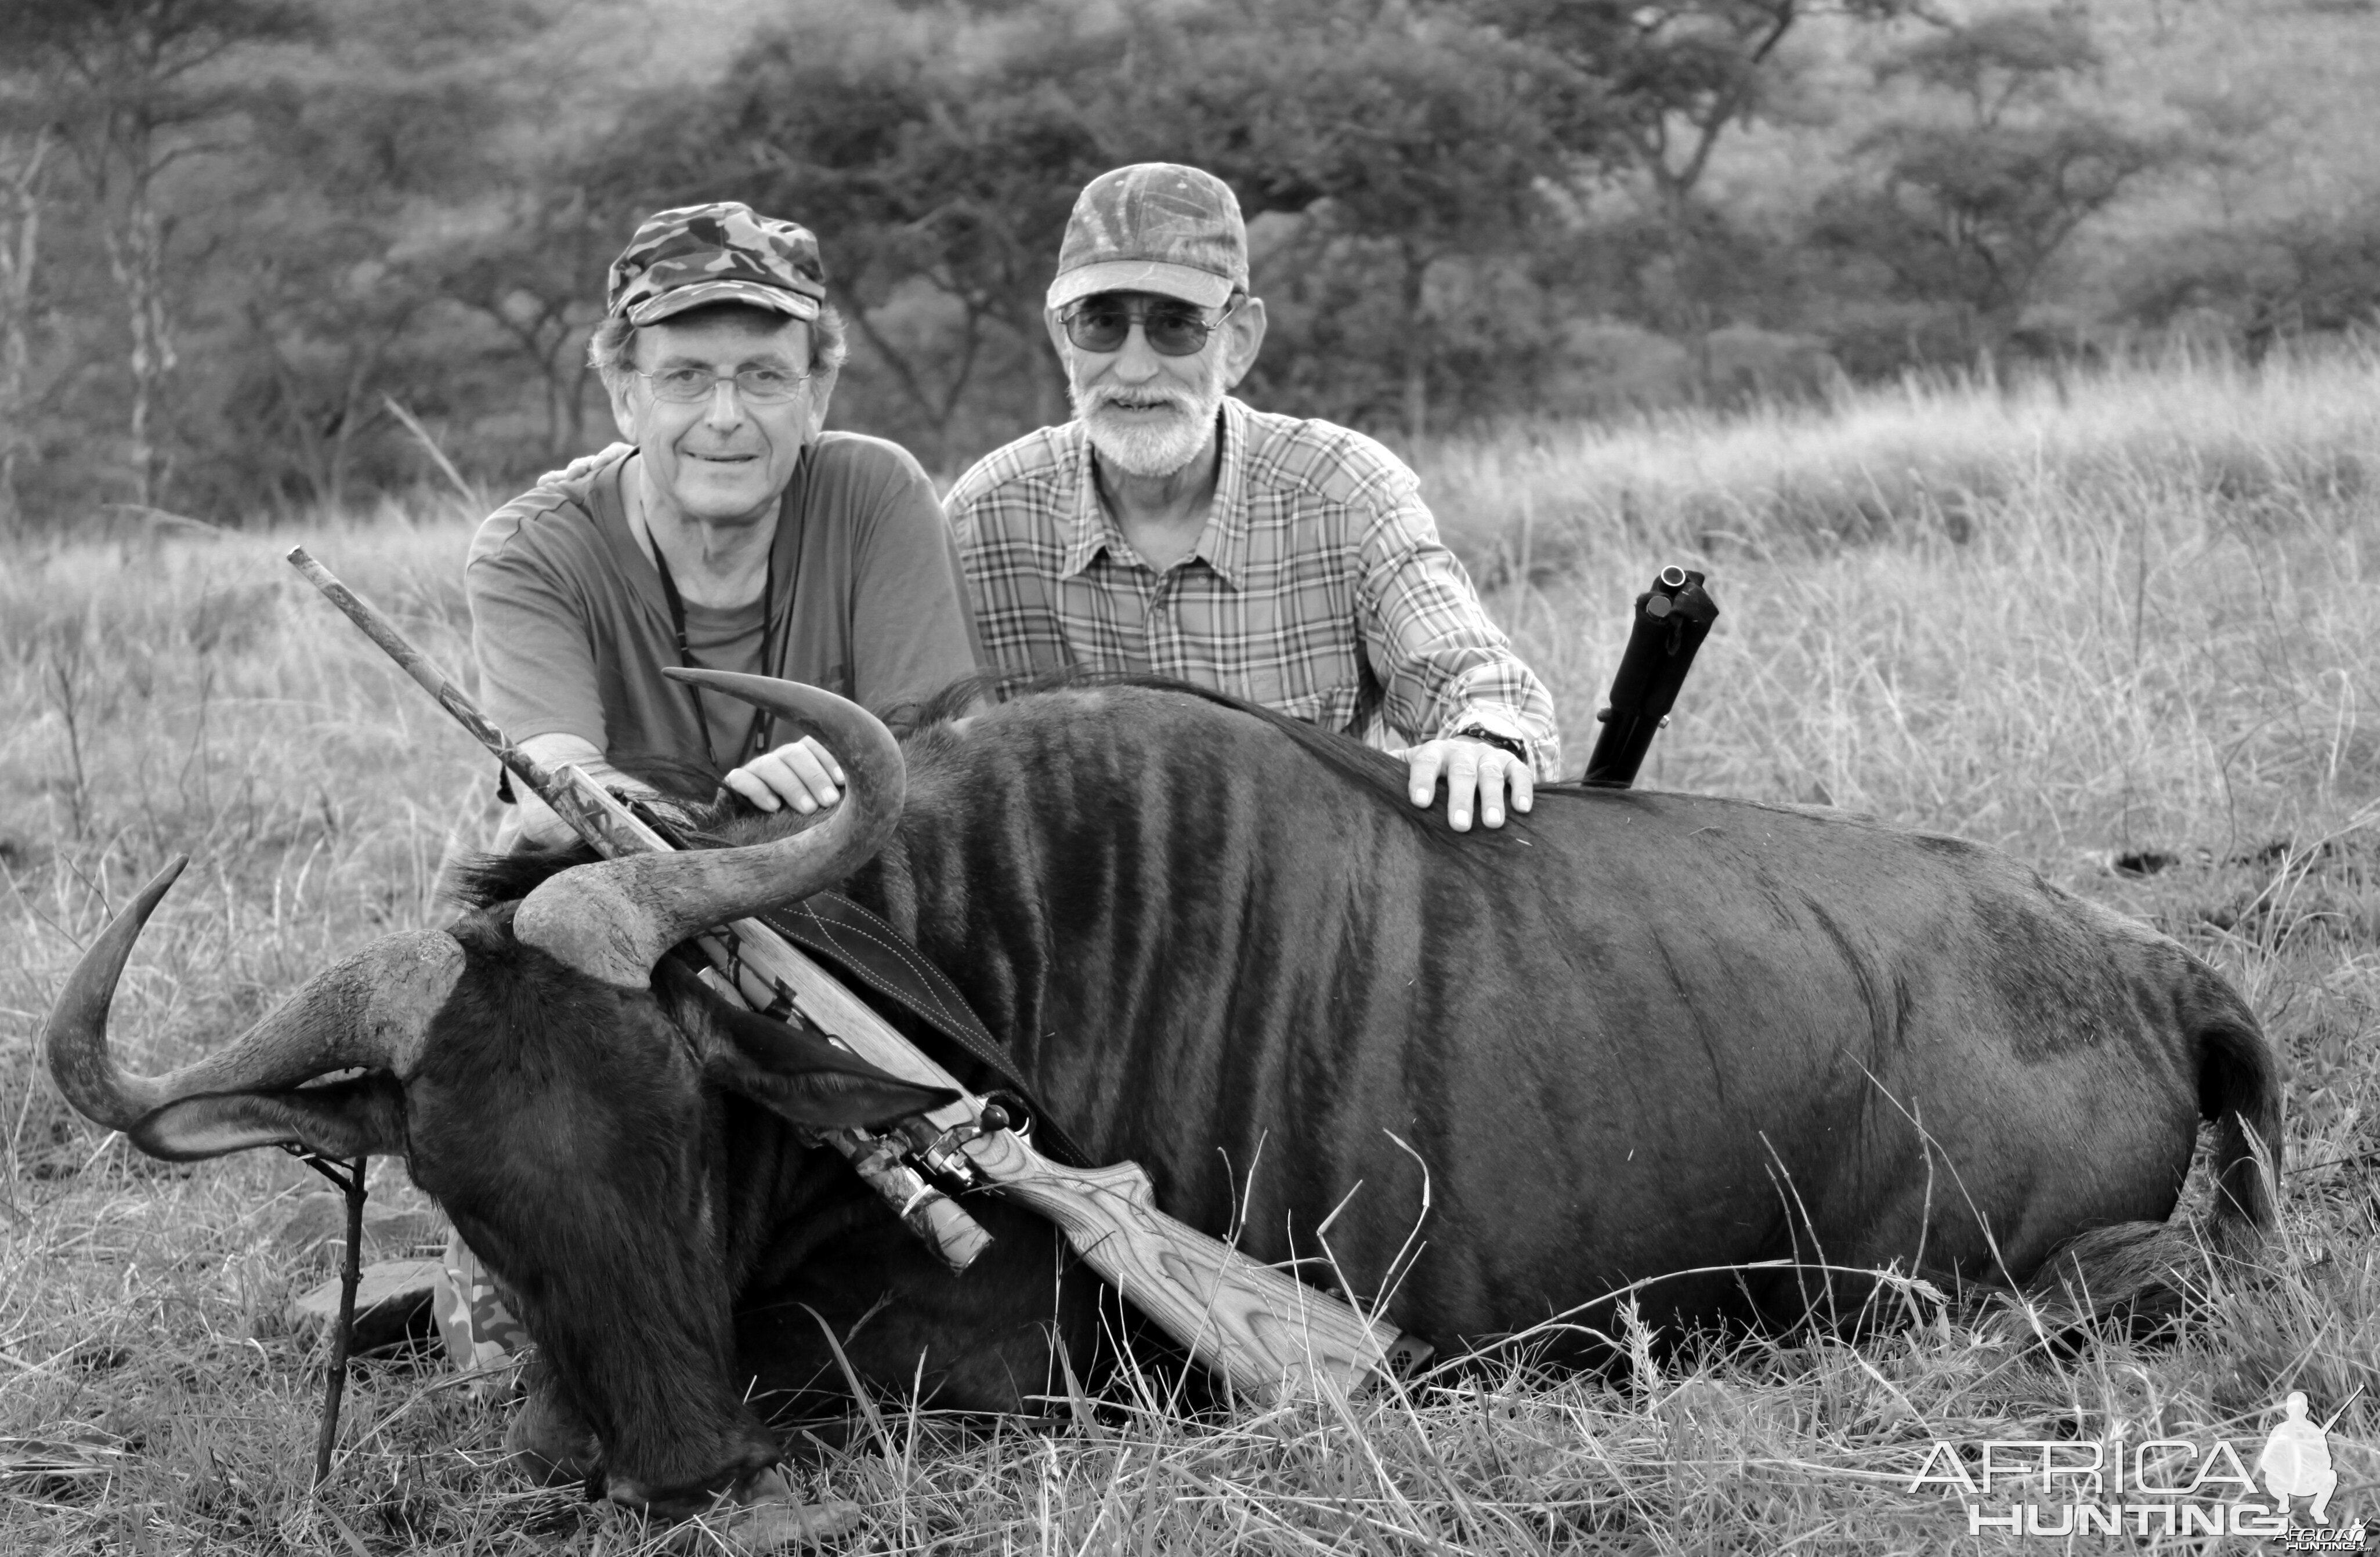 Blue wildebeest hunted in South Africa